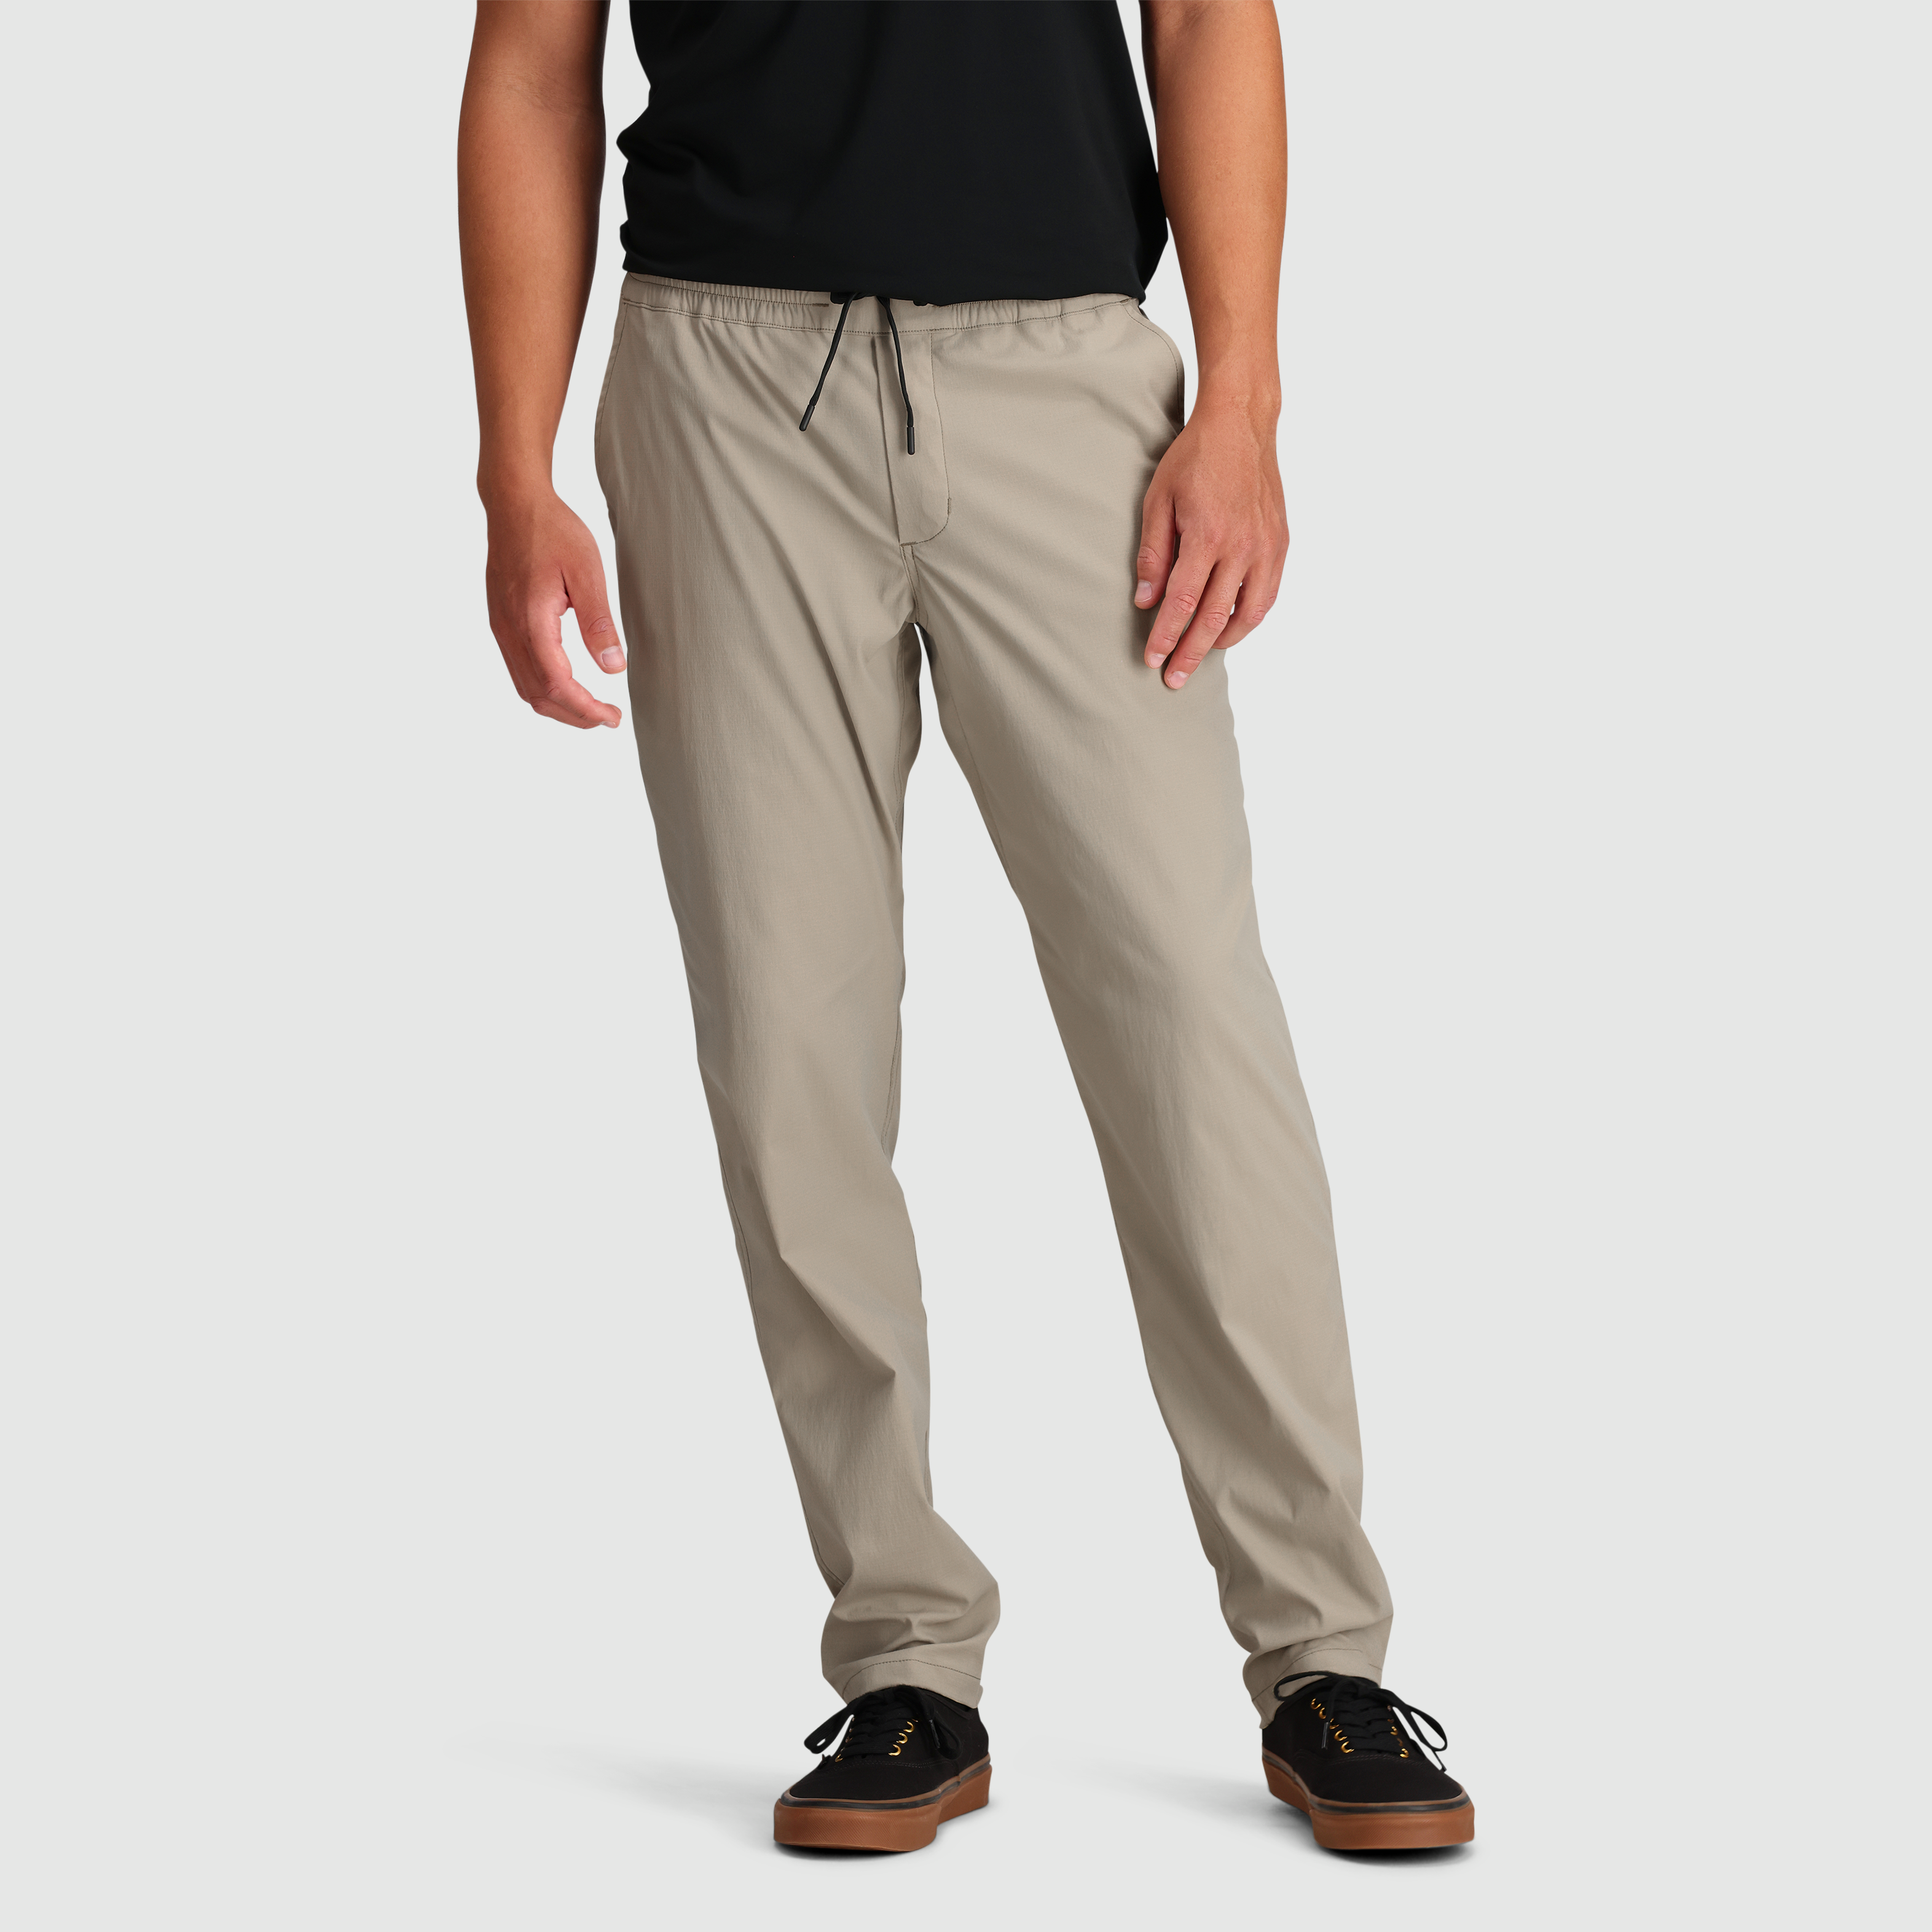 Solid Khaki Baggy Fit Parachute Pants For Mens | Pronk – pronk.in